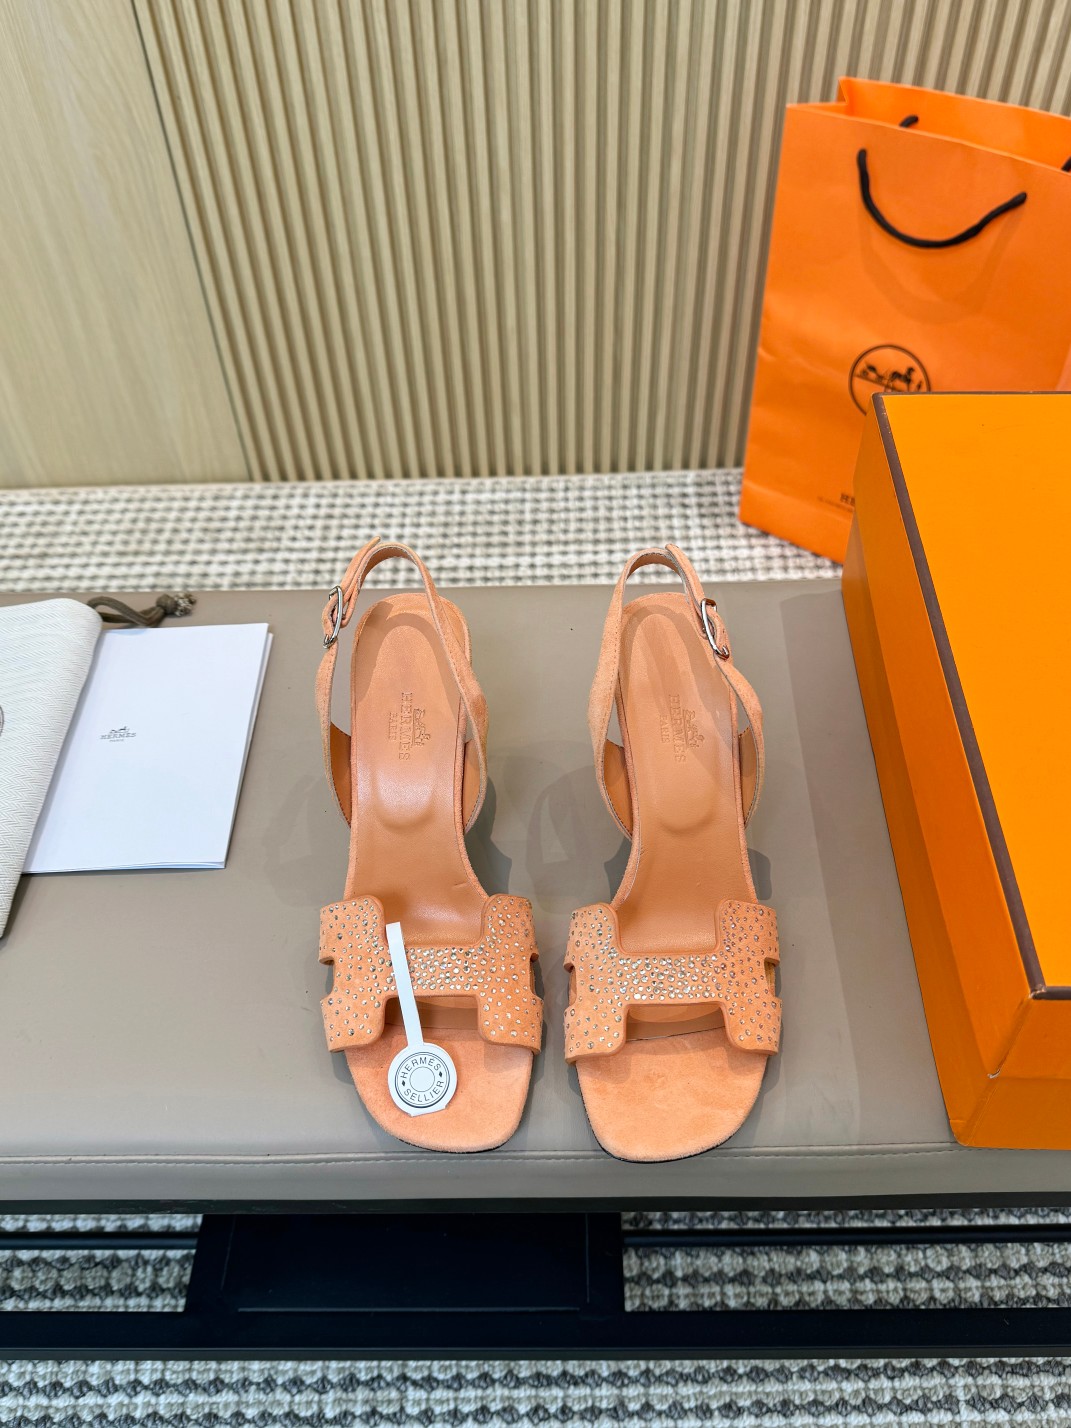 Hermes Shoes Sandals Genuine Leather Fashion